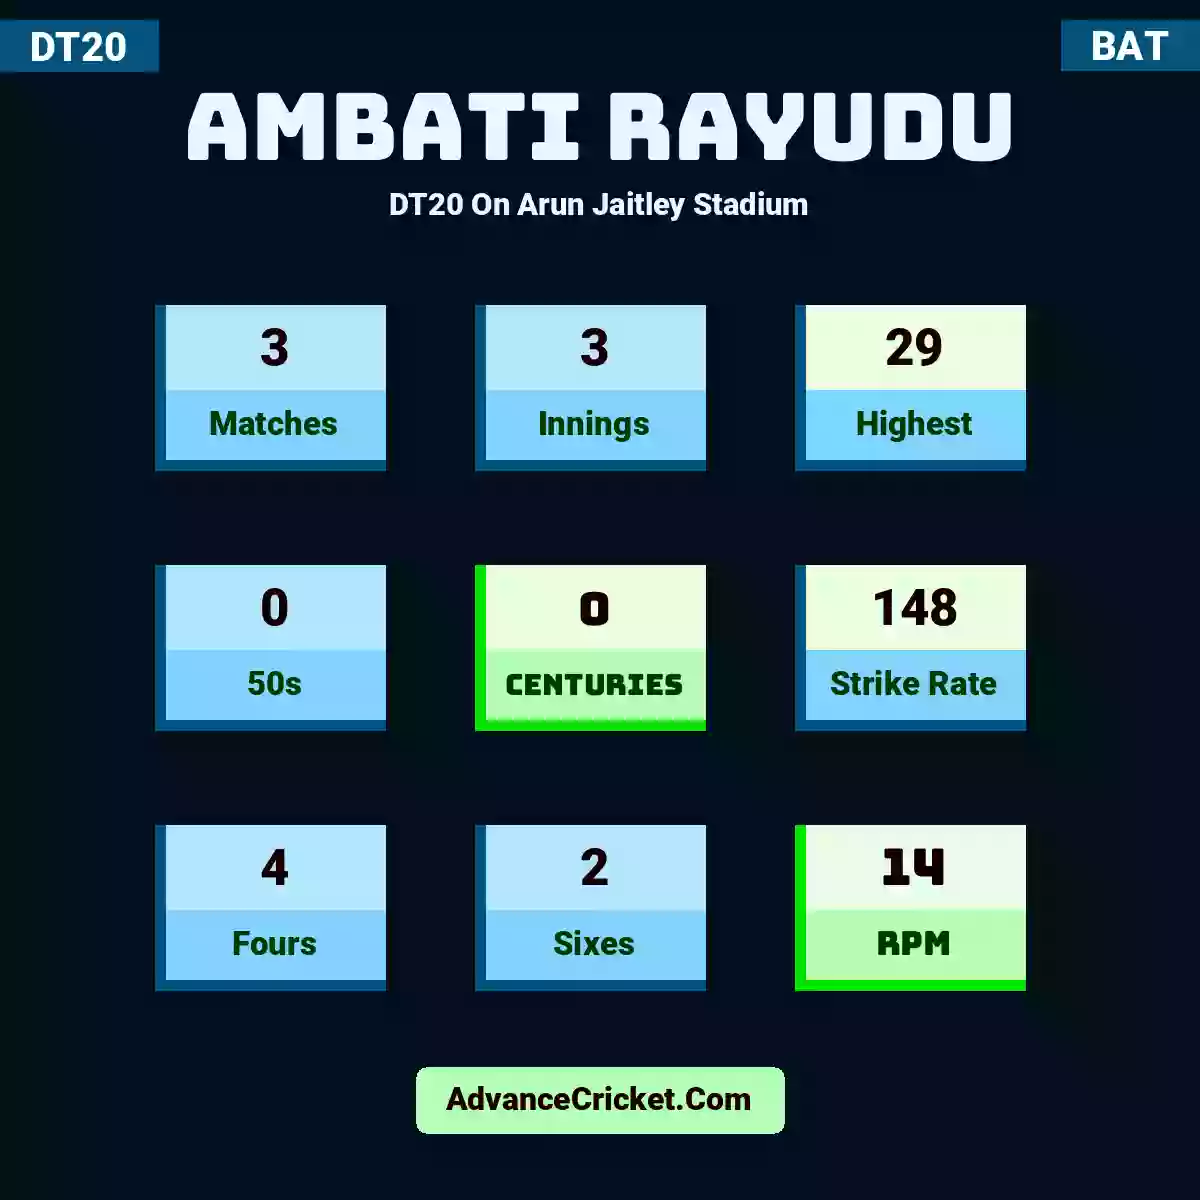 Ambati Rayudu DT20  On Arun Jaitley Stadium, Ambati Rayudu played 3 matches, scored 29 runs as highest, 0 half-centuries, and 0 centuries, with a strike rate of 148. A.Rayudu hit 4 fours and 2 sixes, with an RPM of 14.